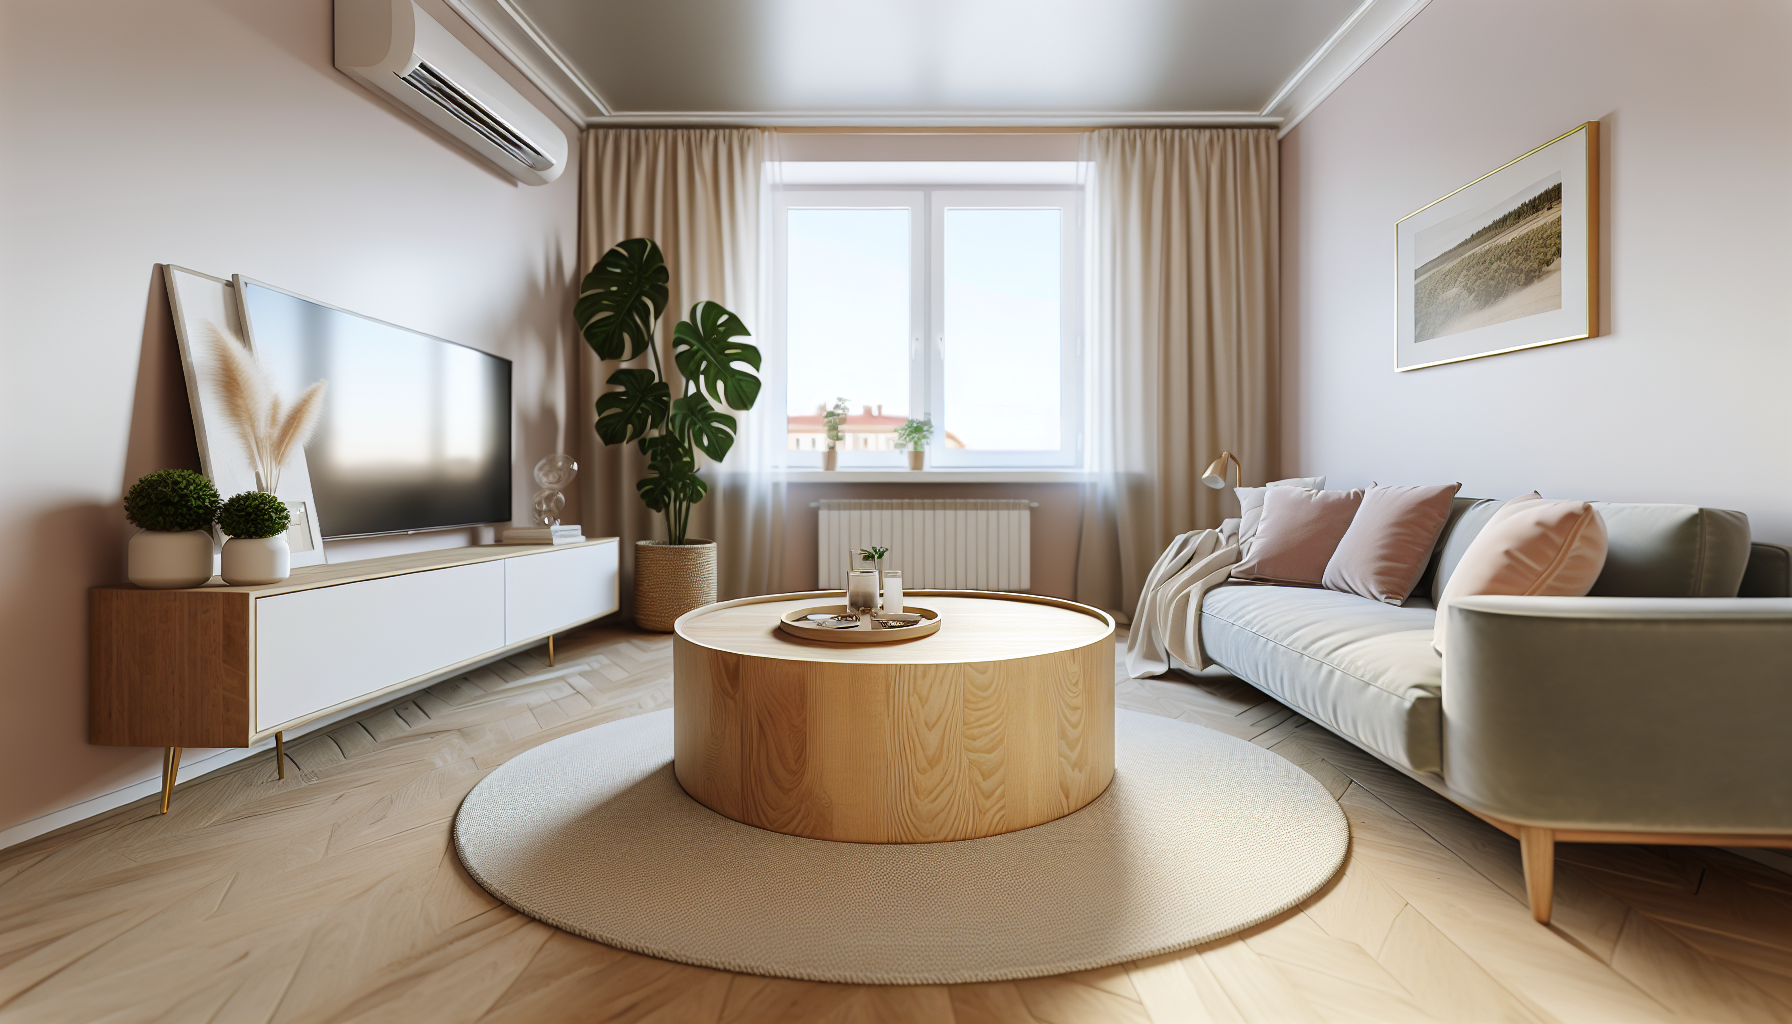 Minimalistic round coffee table in a small, inviting living room